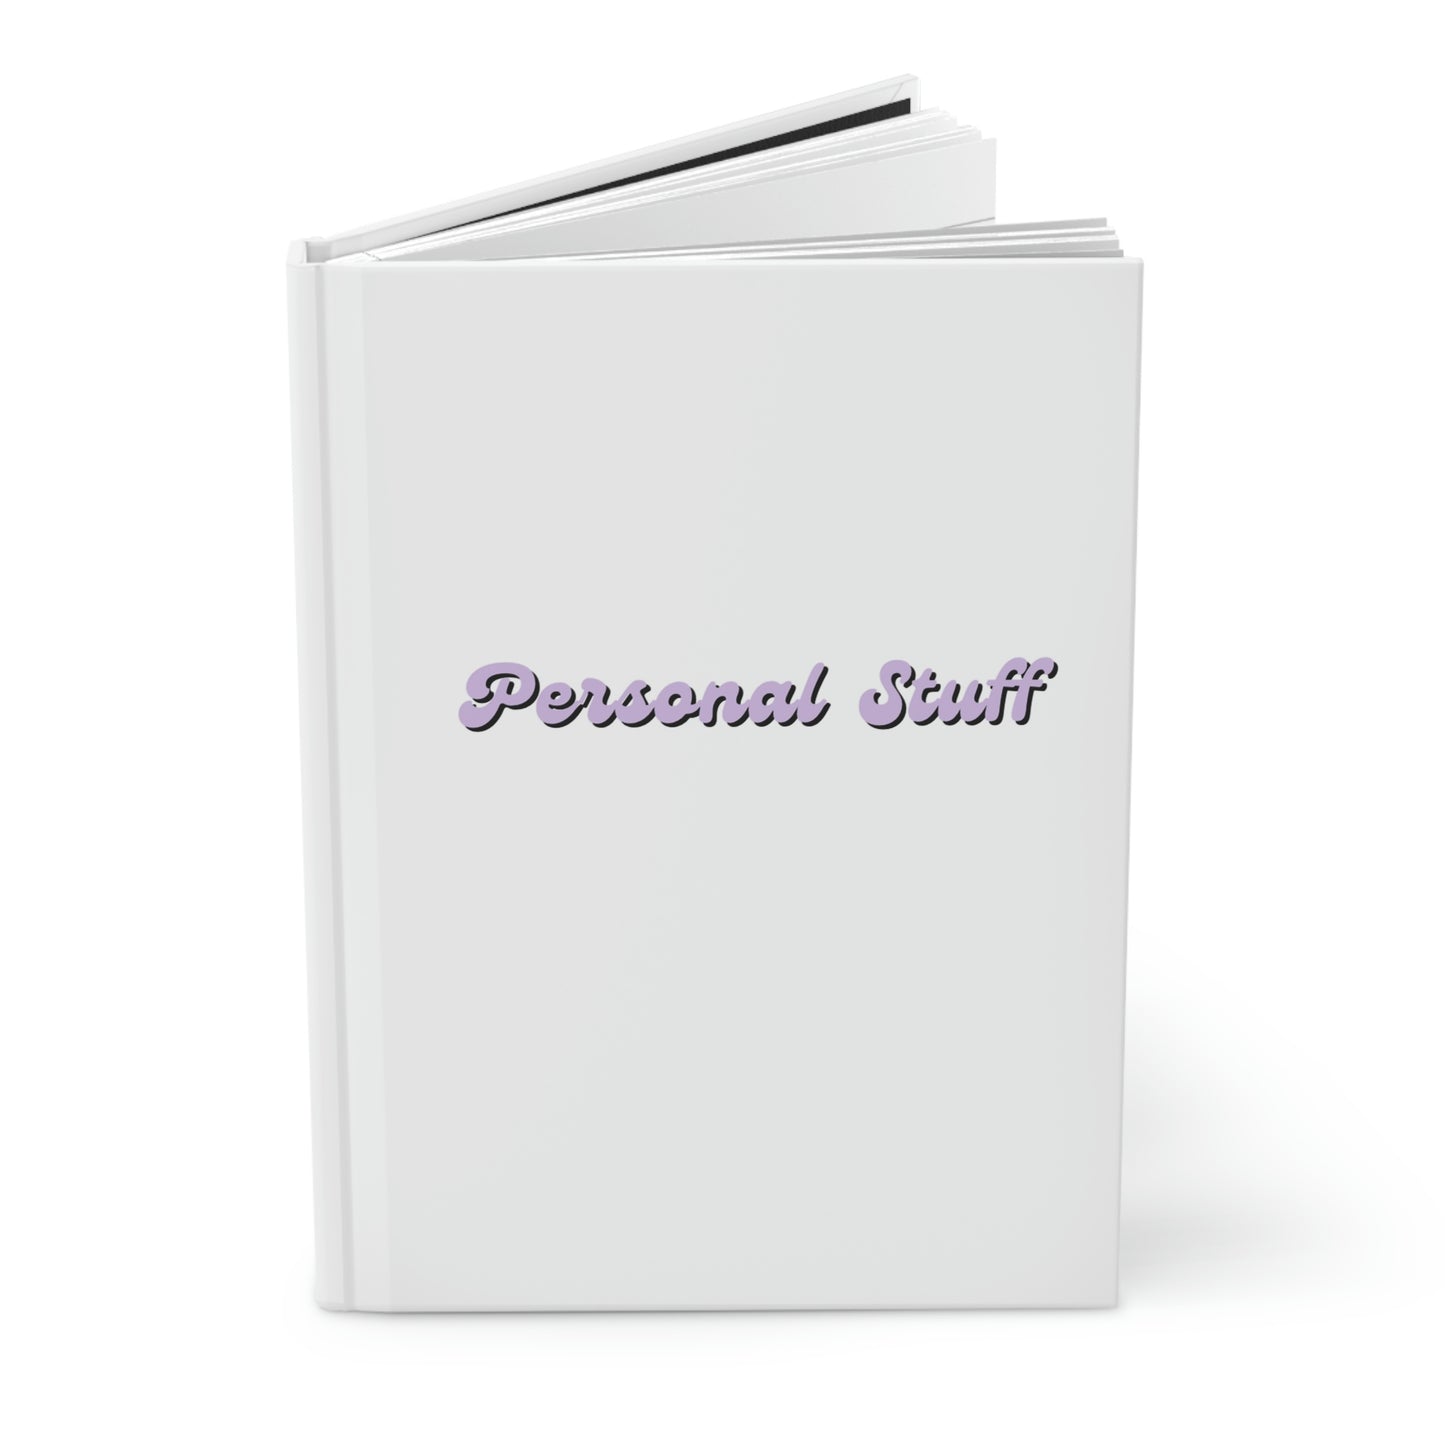 Personal Stuff Groovy Hardcover Journal